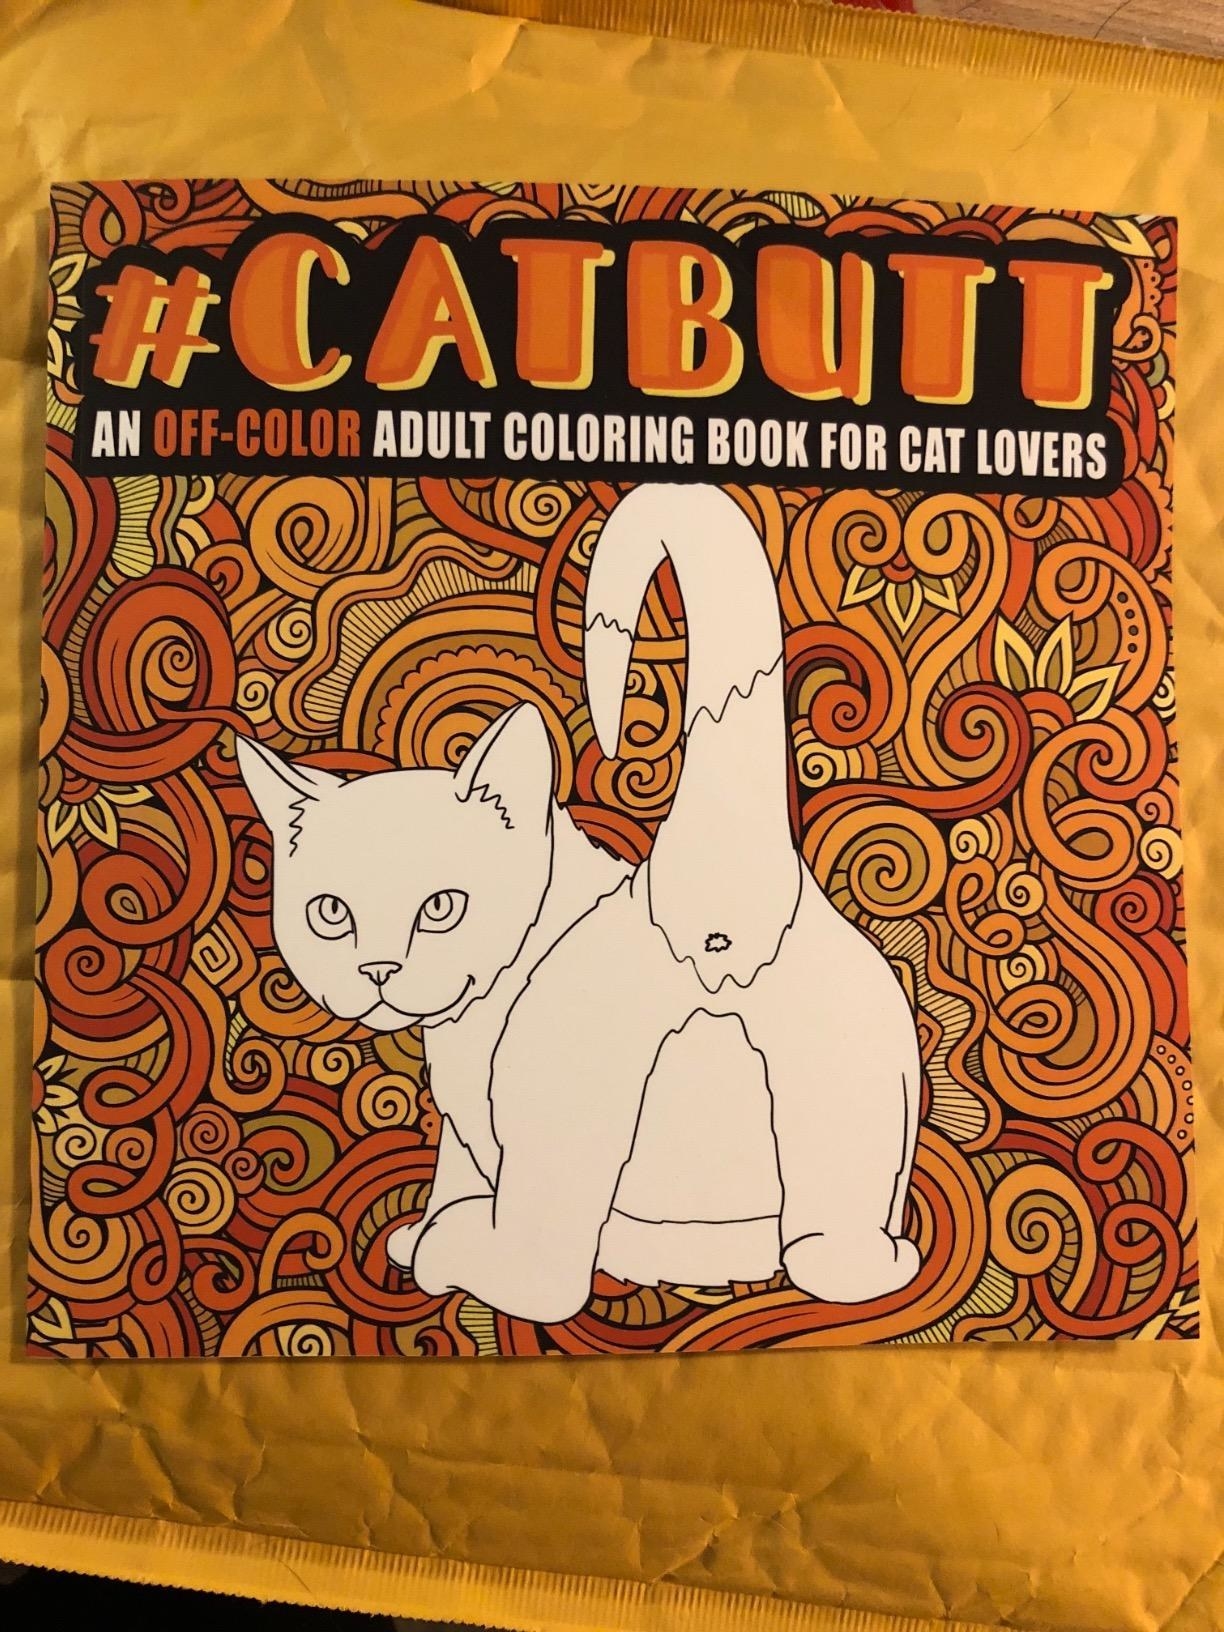 A reviewer&#x27;s photo of the coloring book cover, which shows a white ready-to-be-colored cat showing its butt and looking cheekily at the viewer with the title &quot;#Catbutt&quot; in top